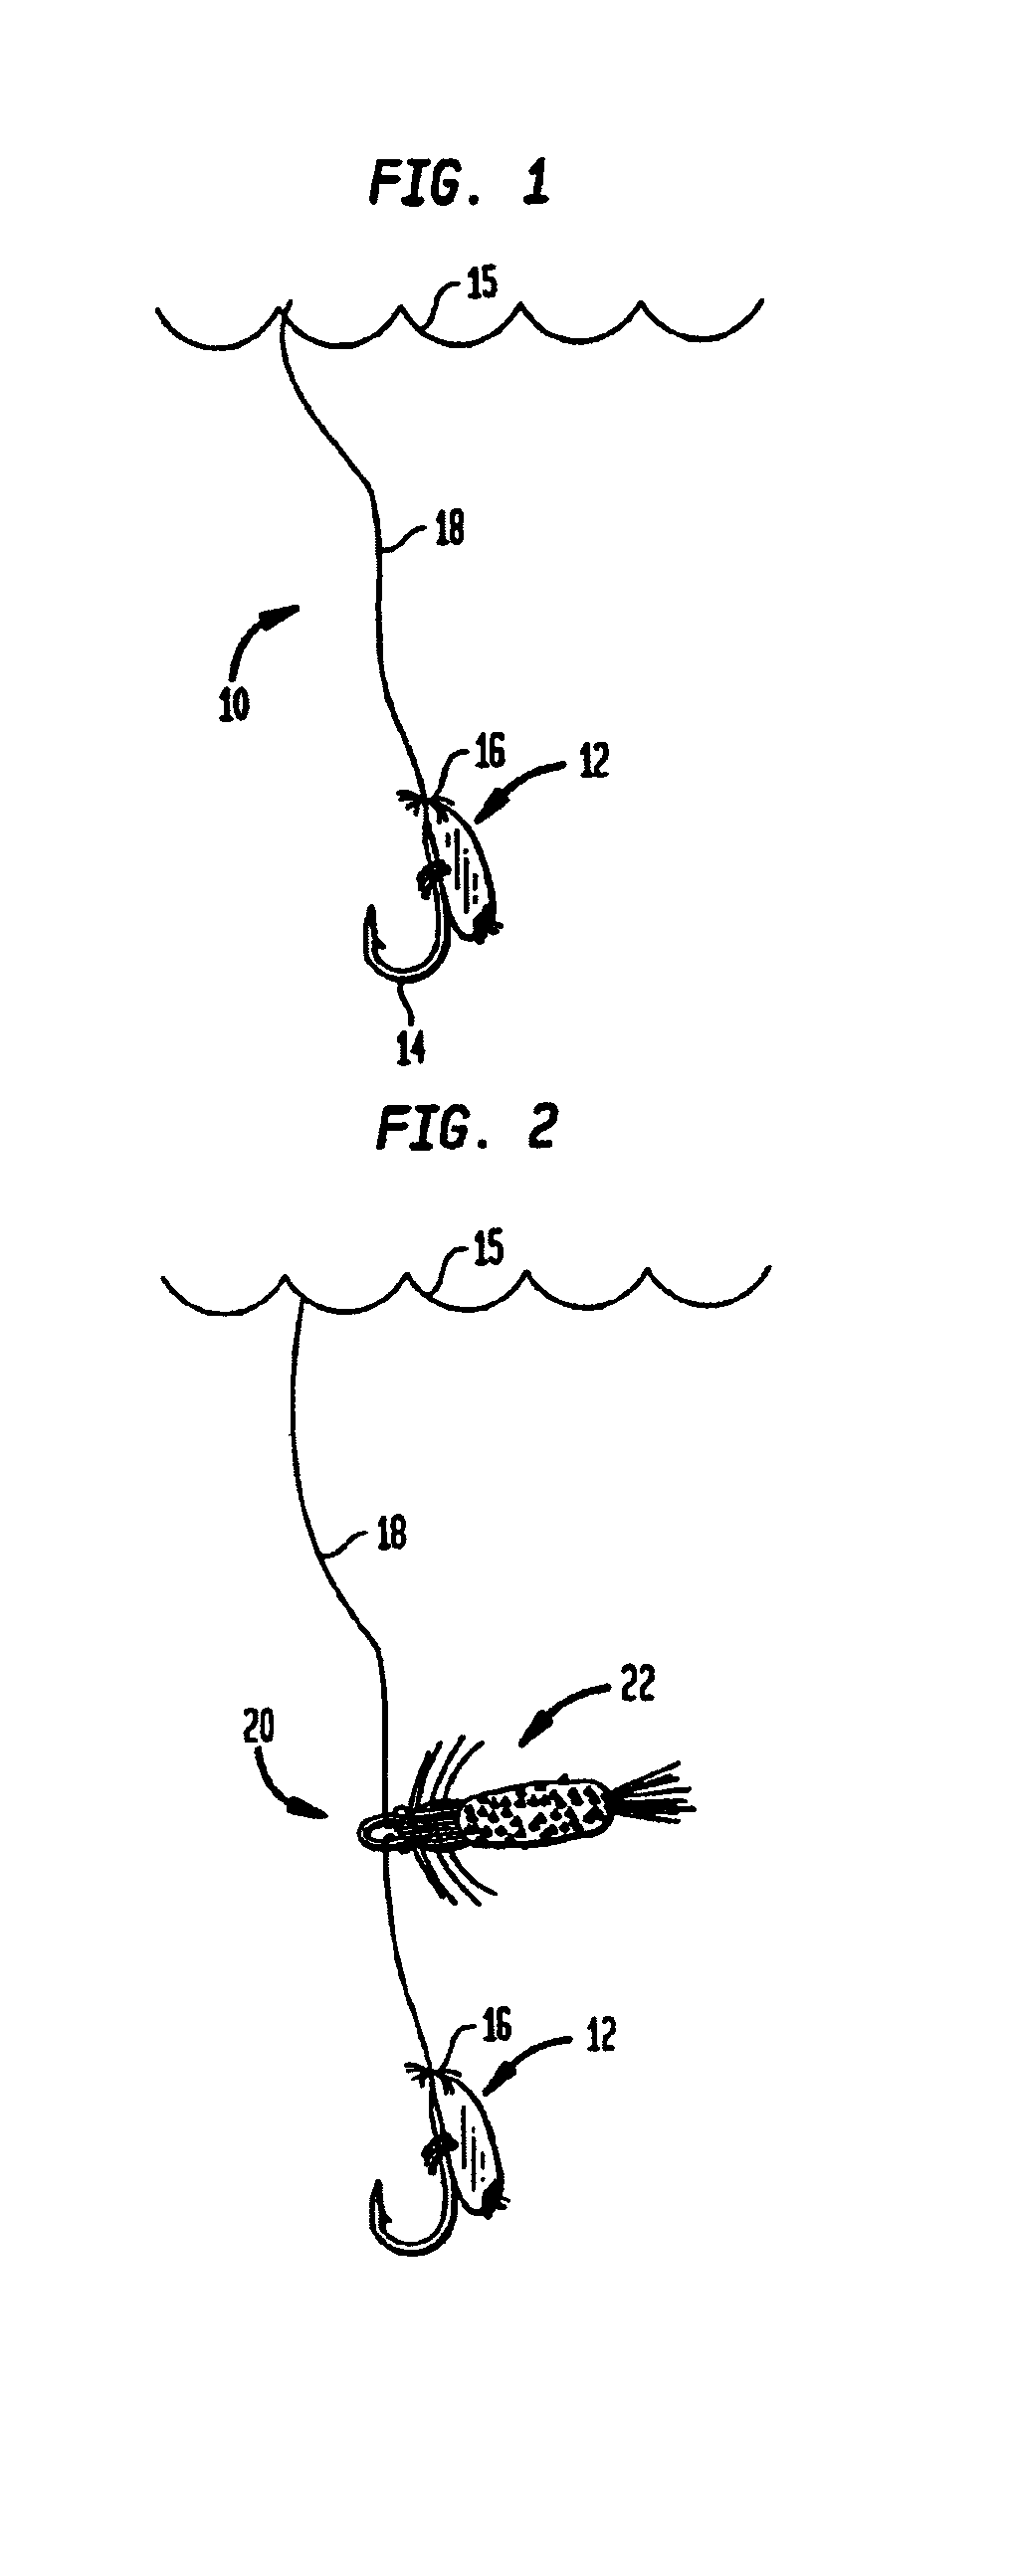 Fishing fly and method of fly fishing